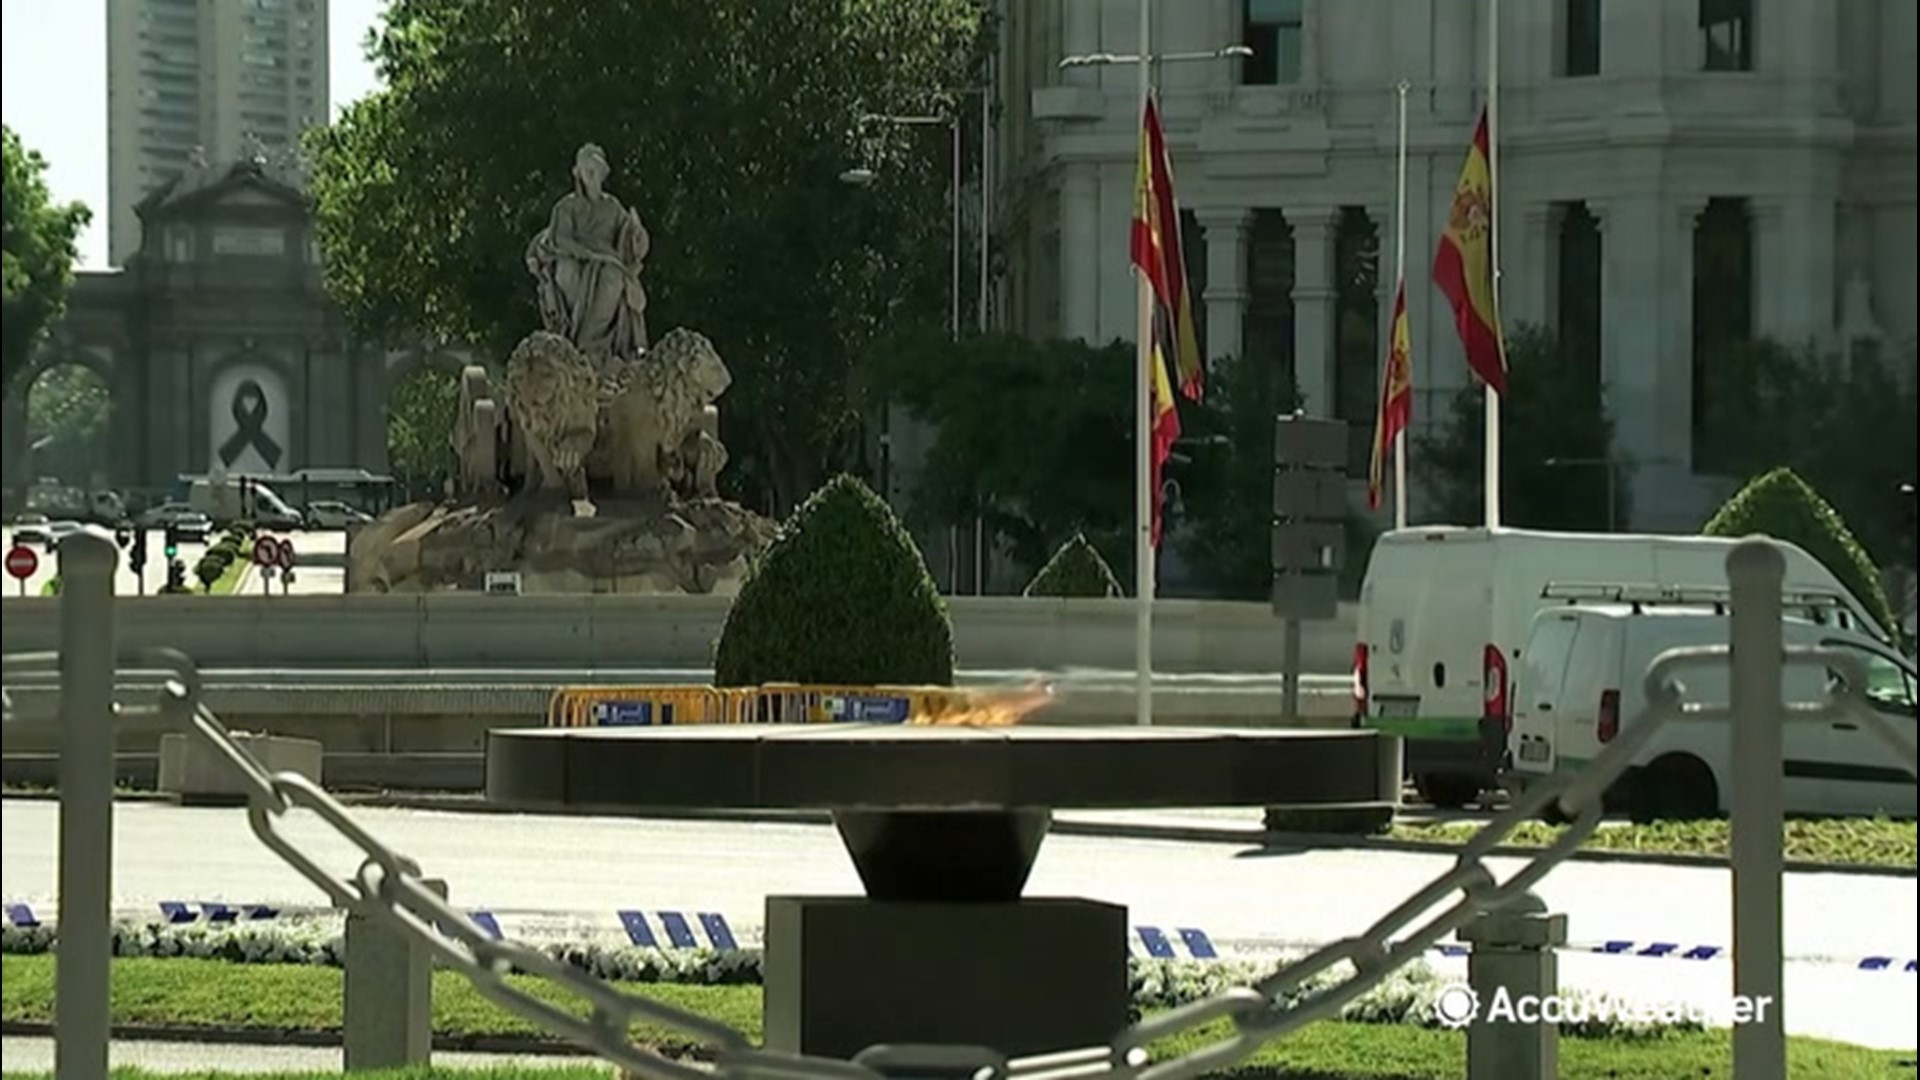 As life returns to Madrid, Spain, people offered tributes on May 28 to those who died from COVID-19. Some tributes included burning flames, flowers and signs.